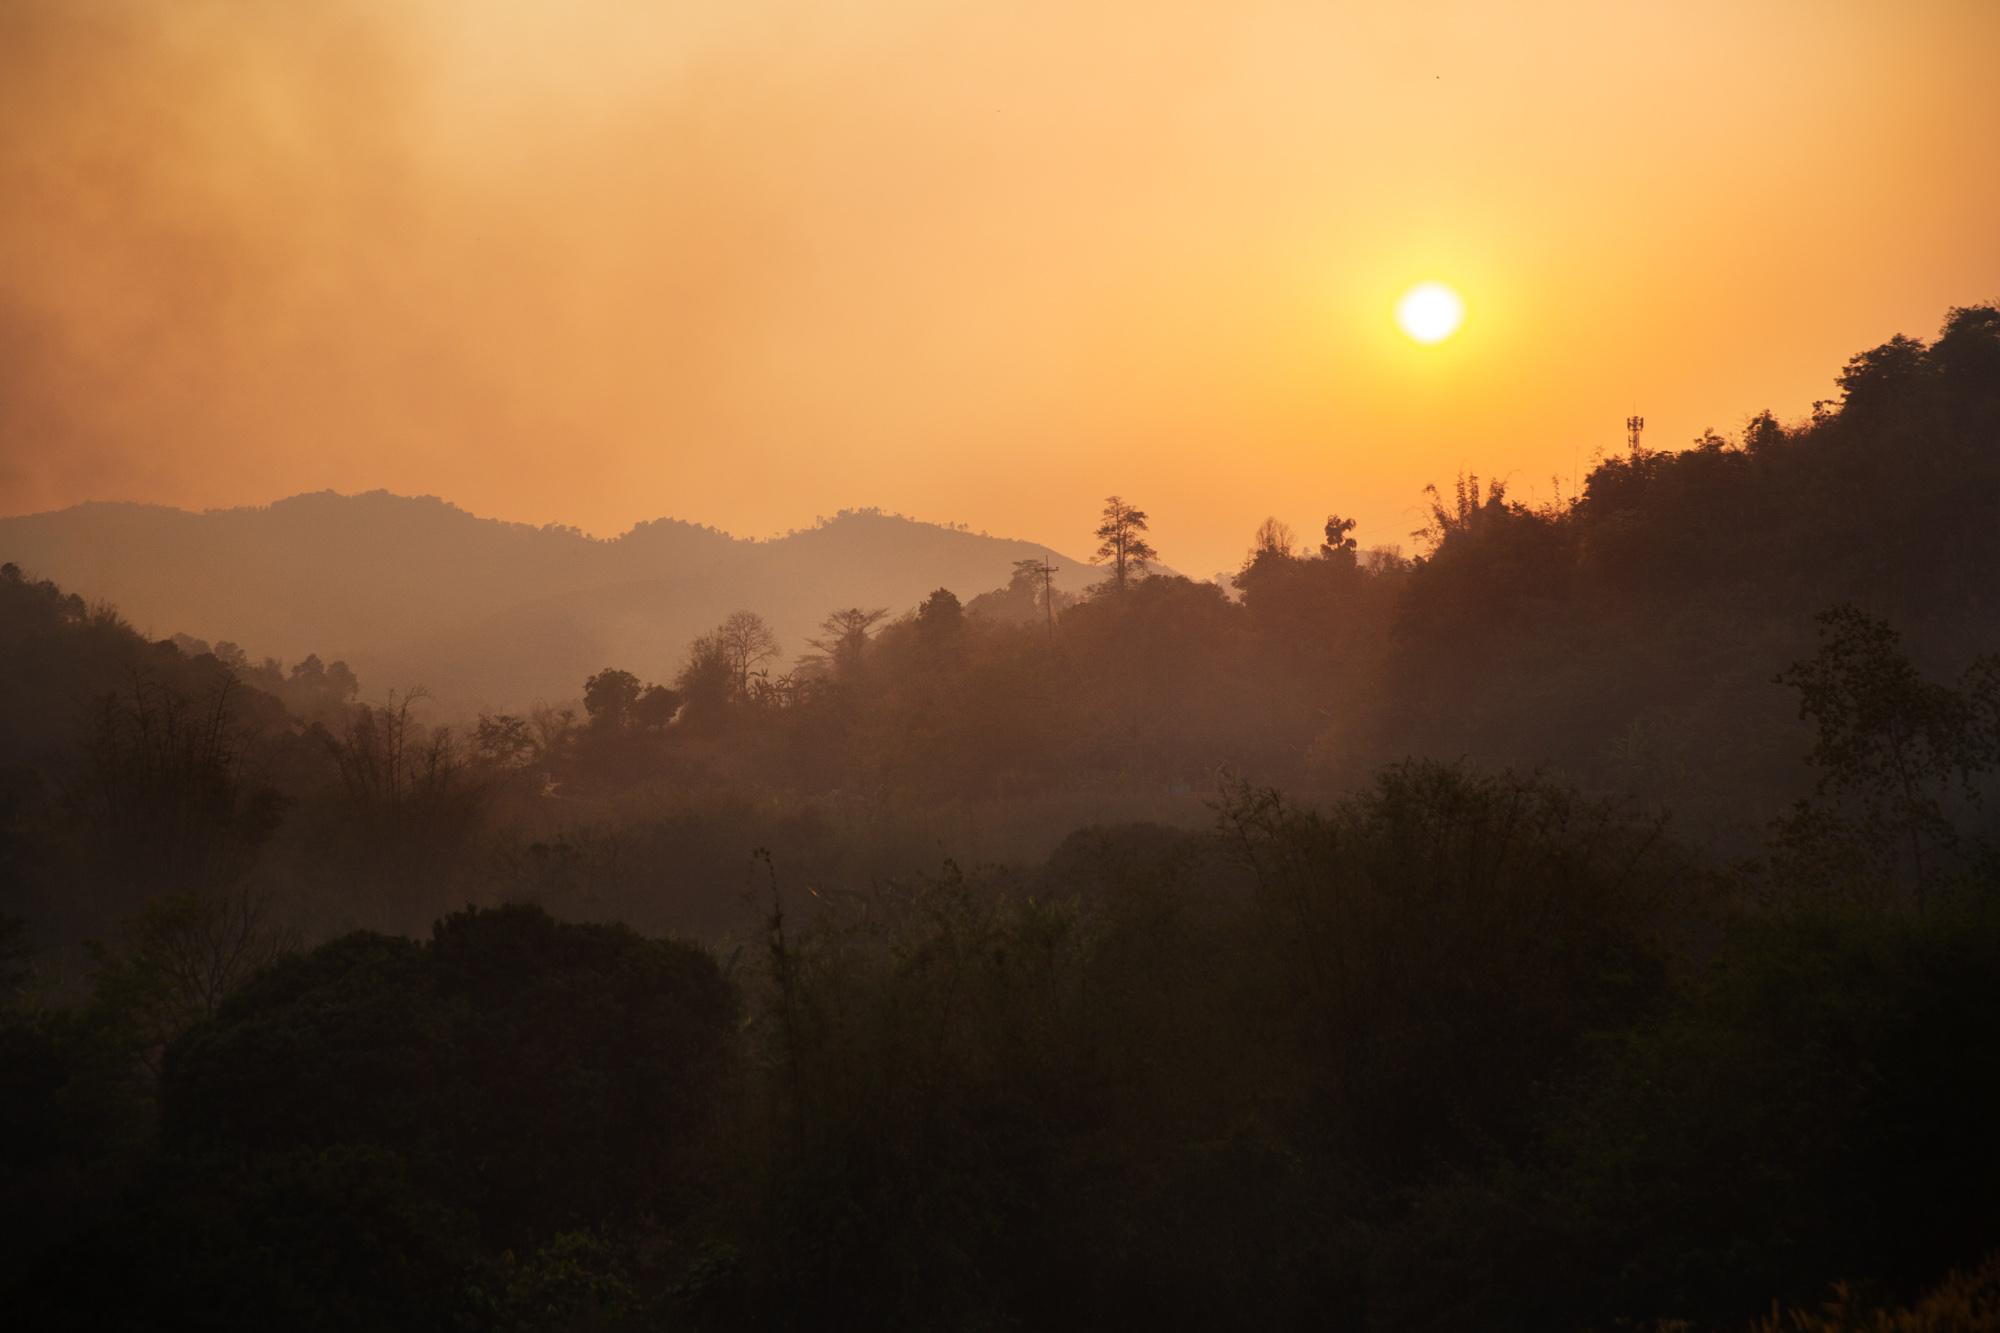 Thailand Burns - Smoke from multiple forest fires fills the air over a...